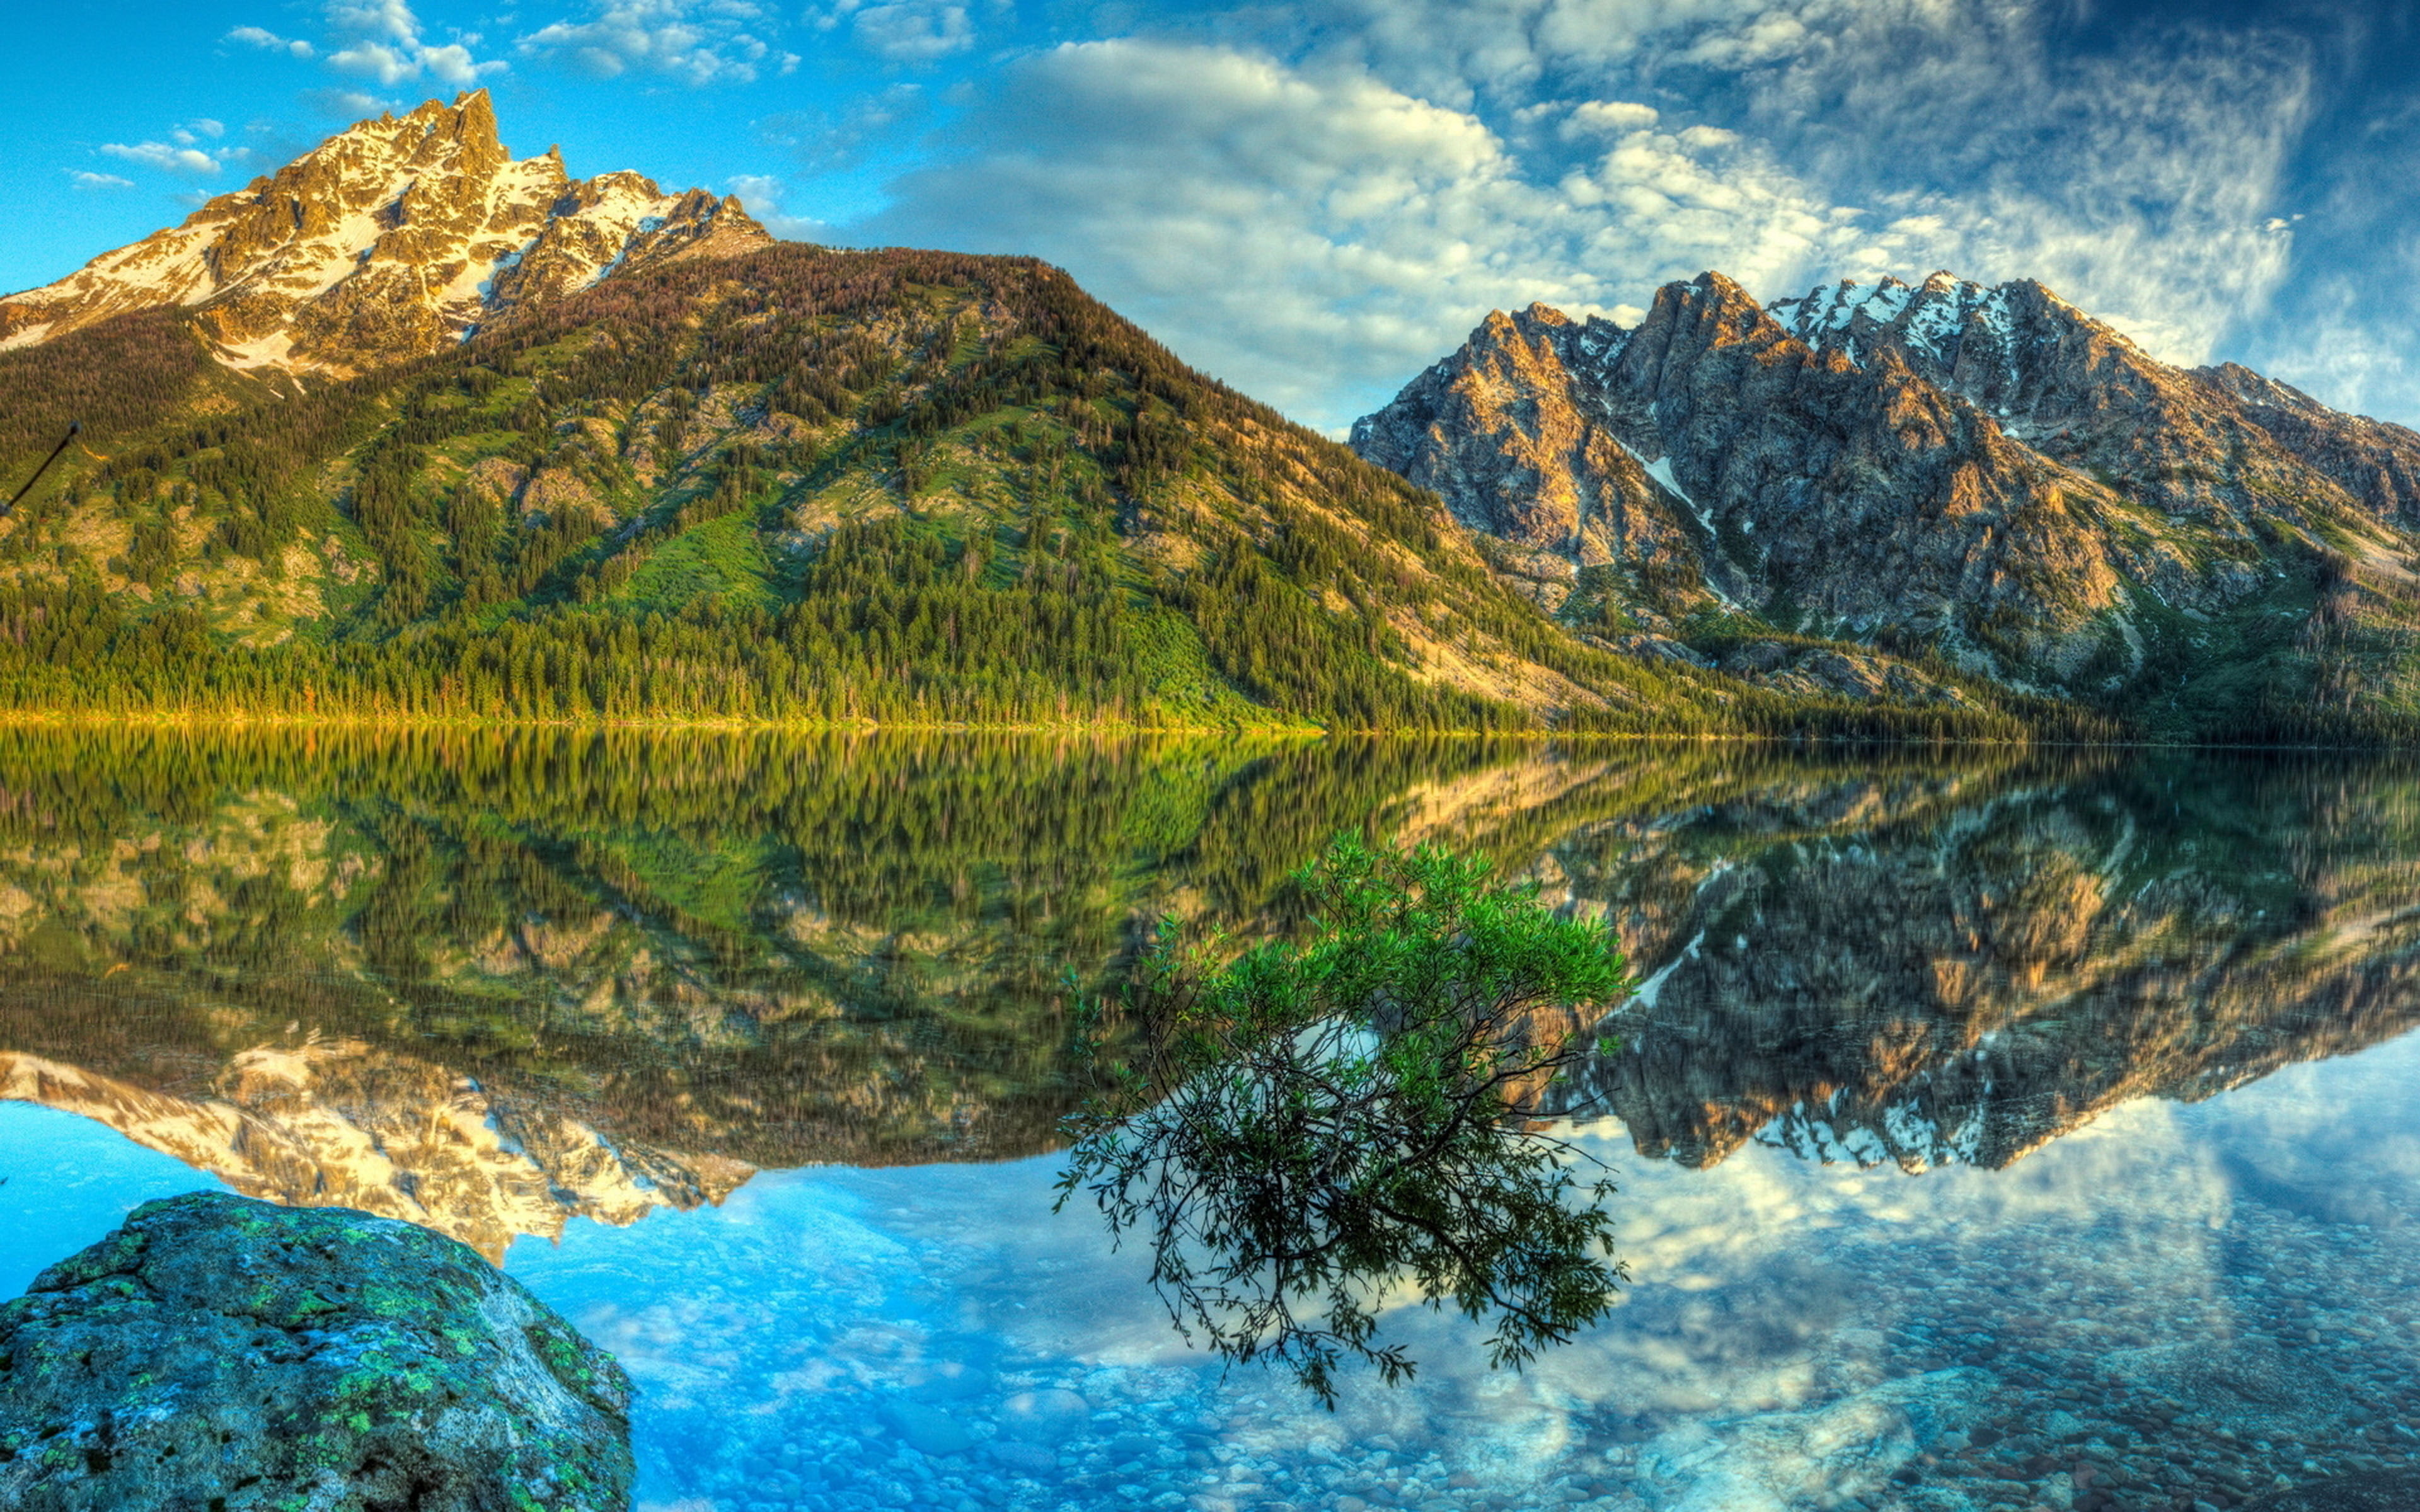 Nature Hd Wallpapers For Desktop Mountains Lake Reflection Clouds Sky 3840×2400